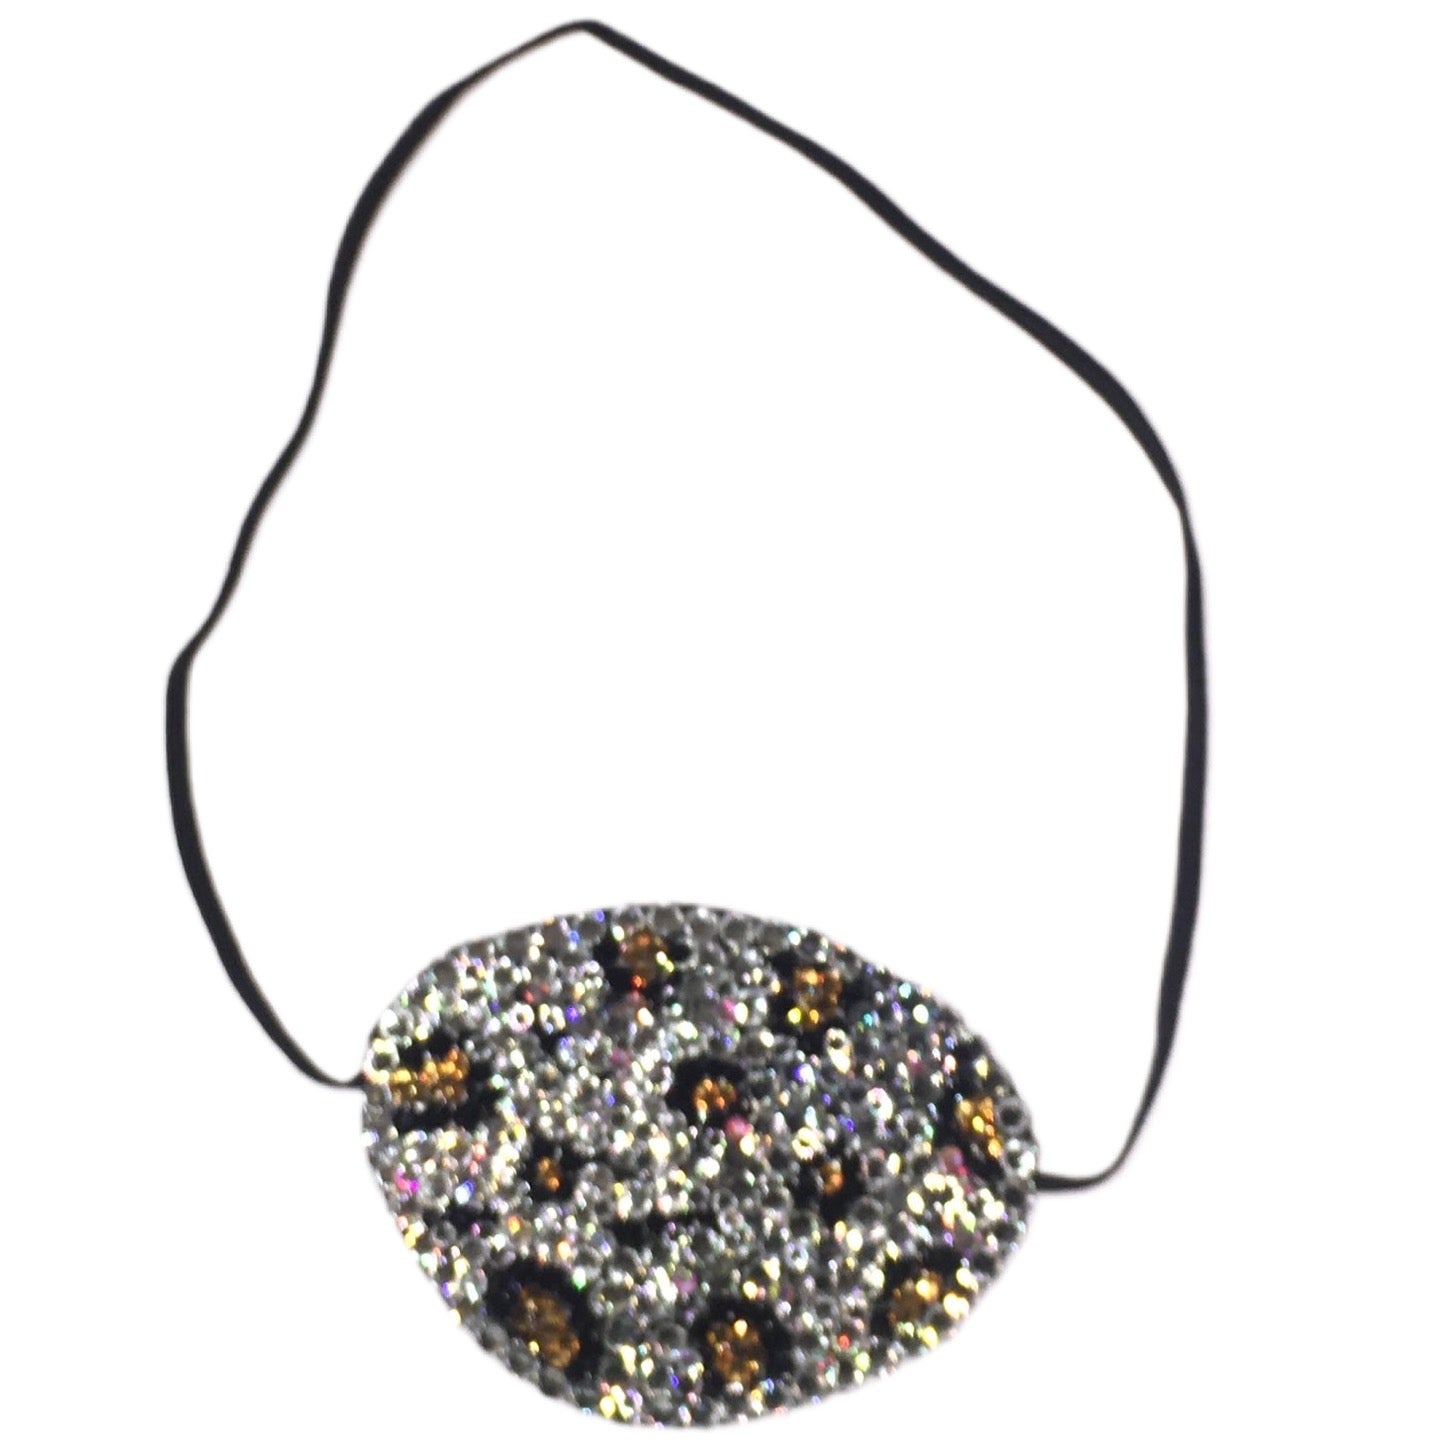 Black Eye Patch Bedazzled In Crystal Leopard Print Design